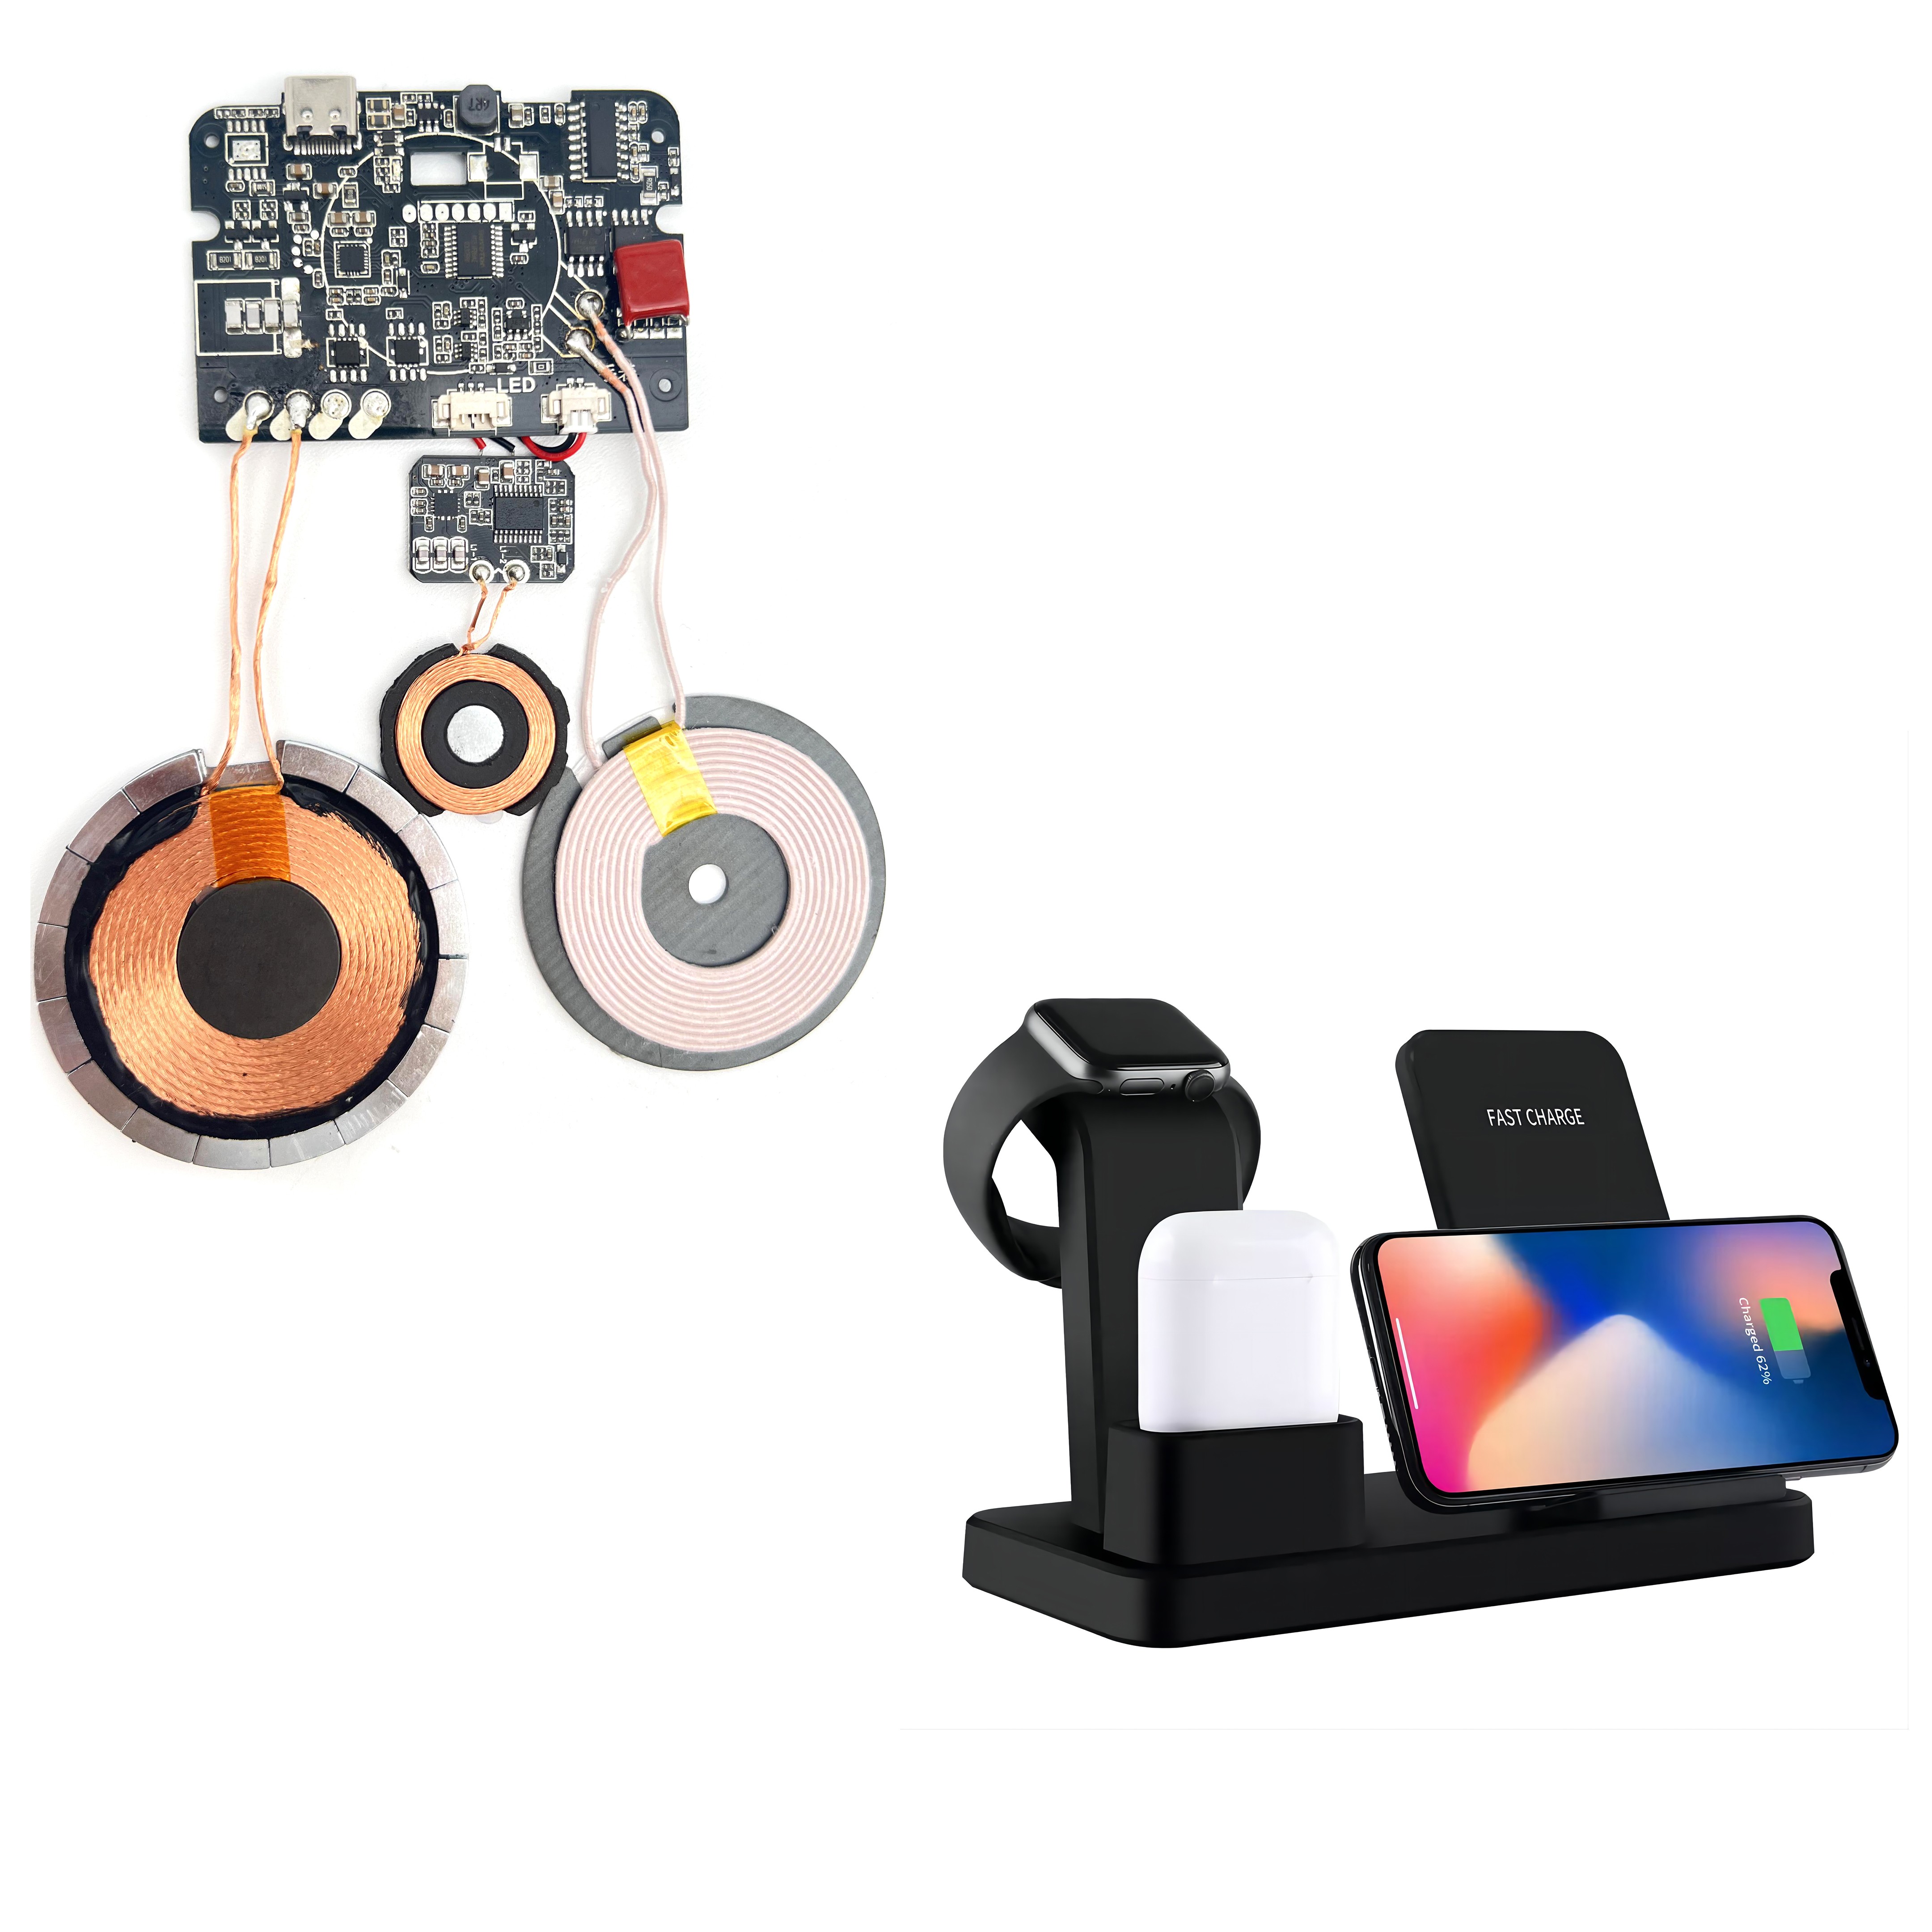 3in1 3 in1 wireless chariging customization wireless charger module for IPhone Apple watch earbuds